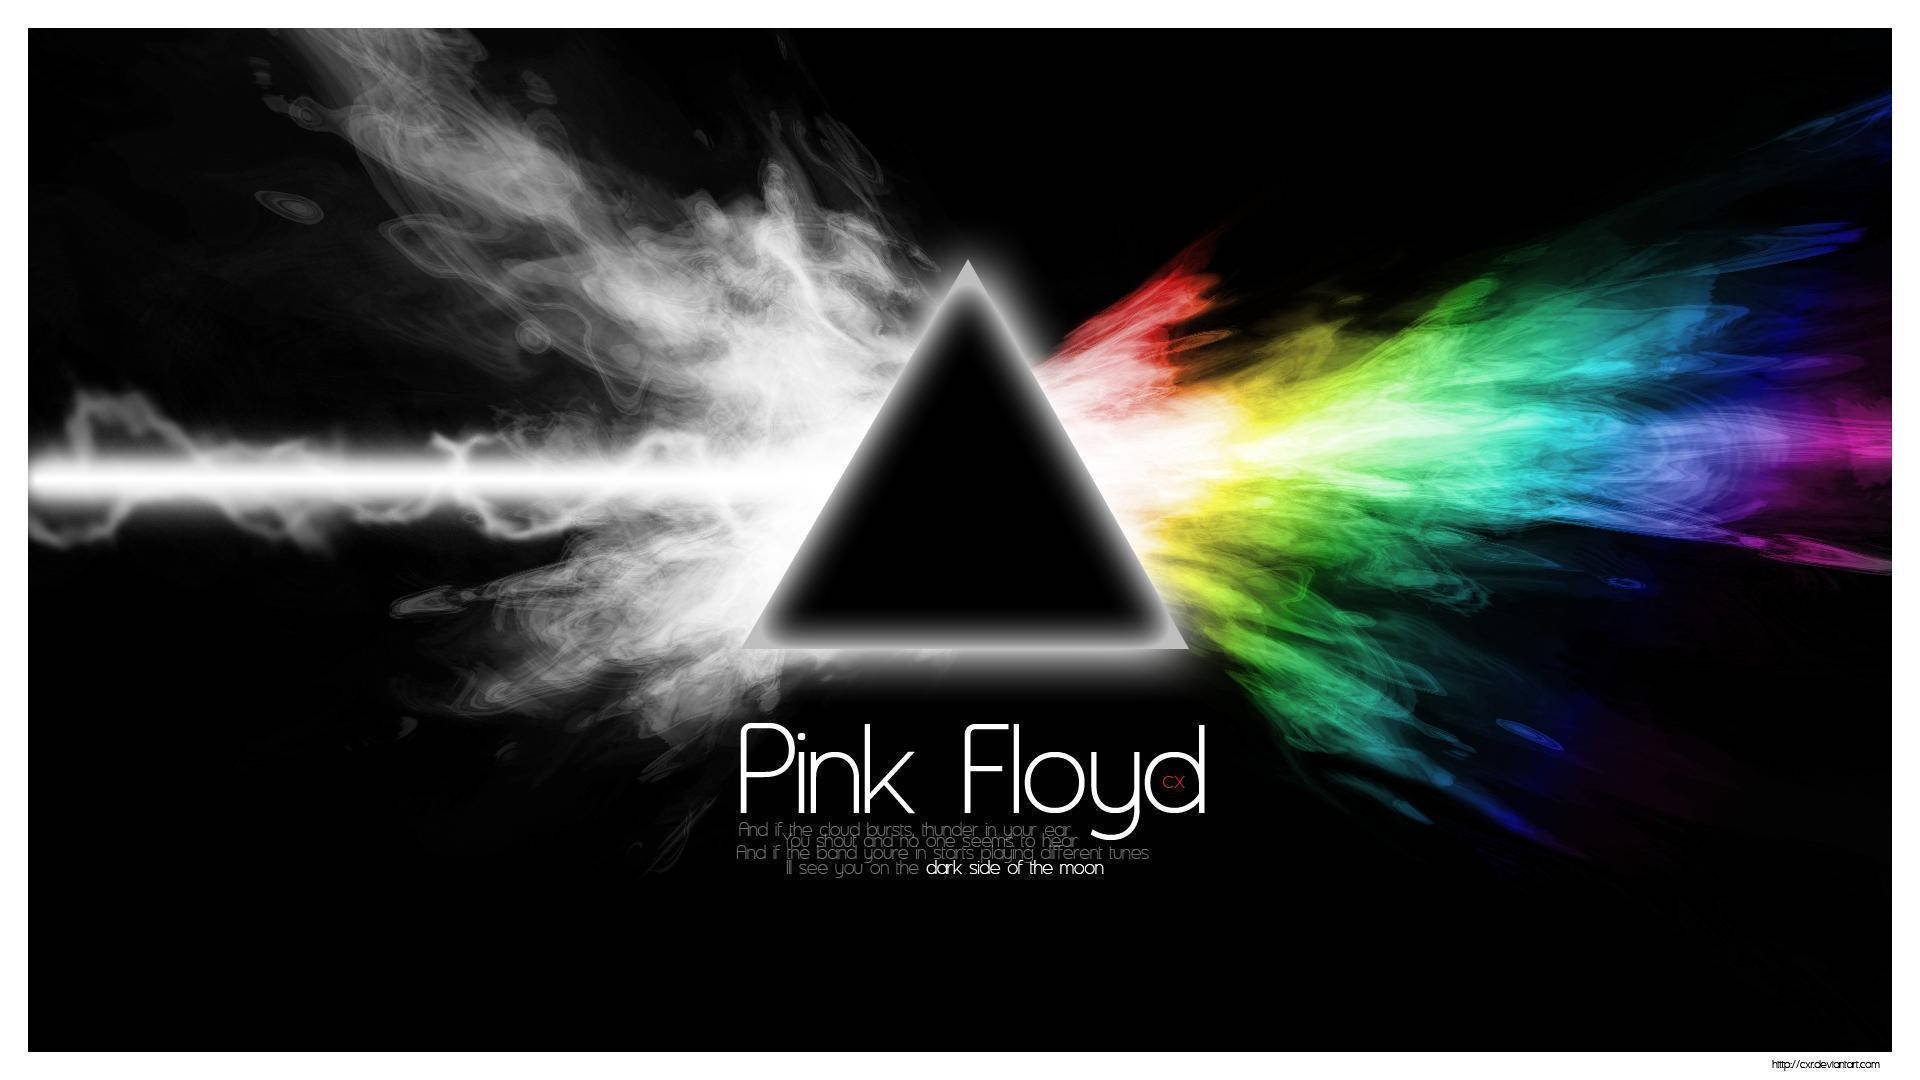 Pink Floyd's “The Dark Side of the Moon” Album Cover Wallpaper